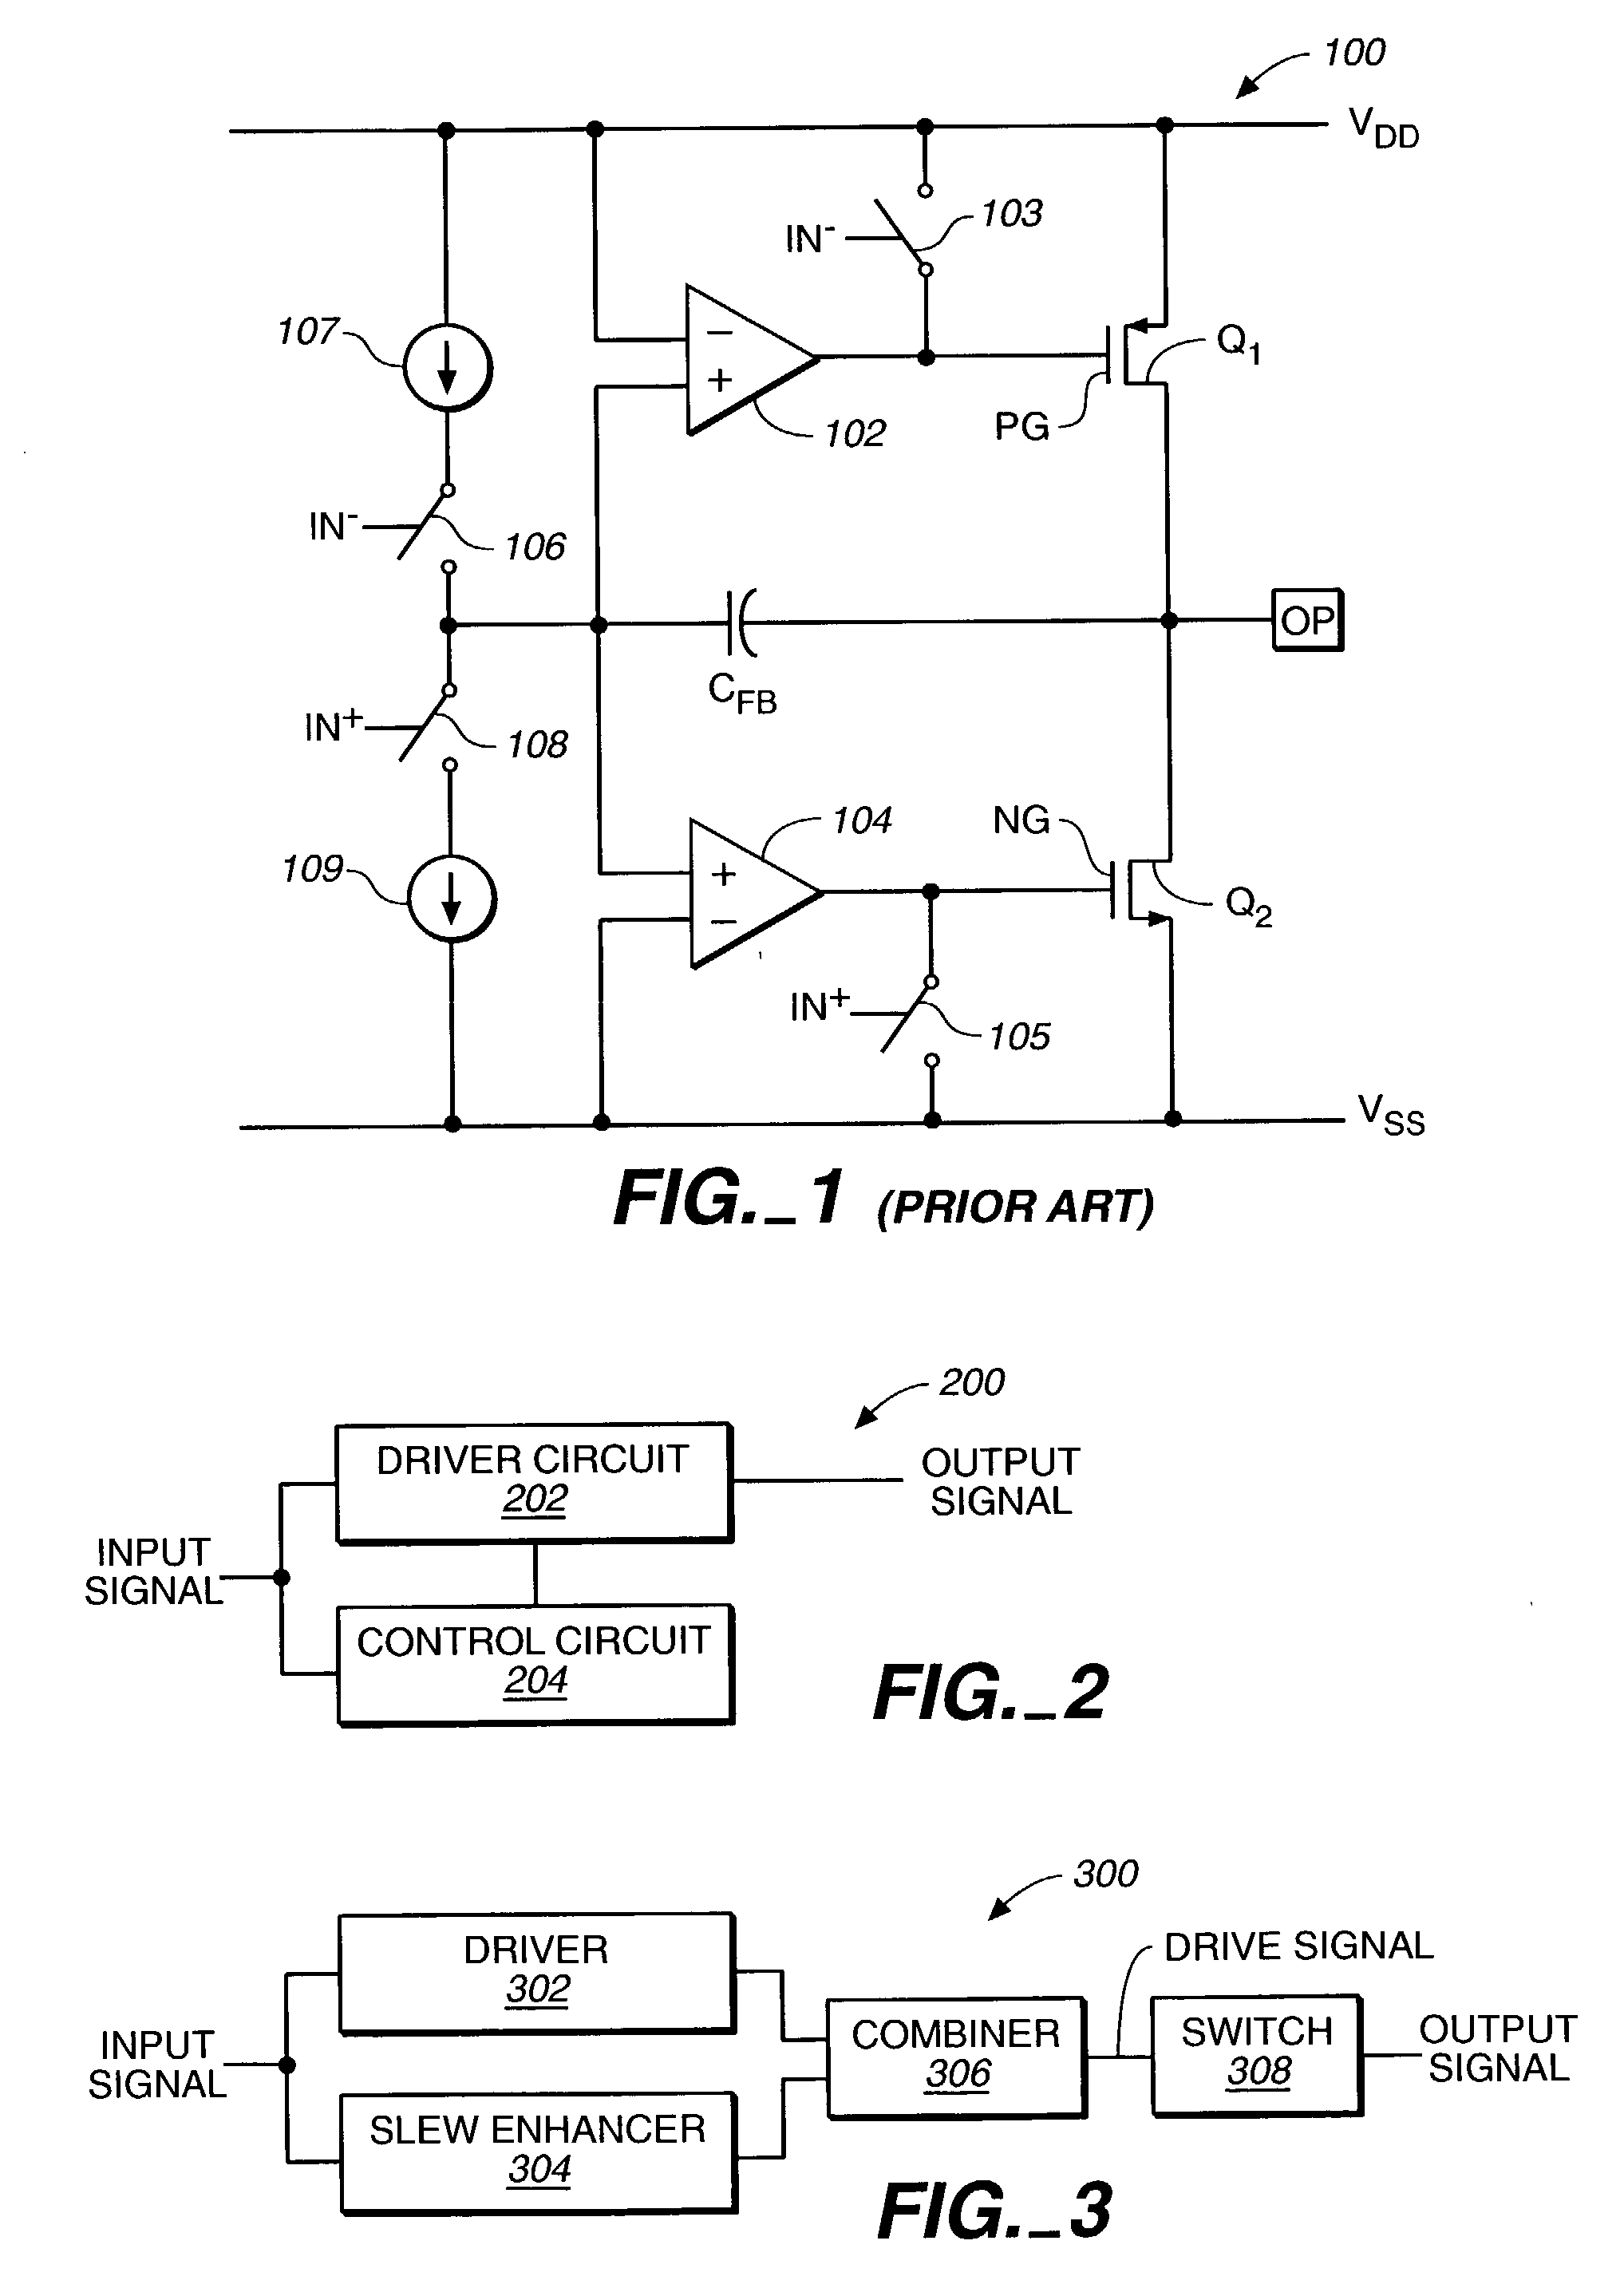 Method and apparatus for slew control of an output signal